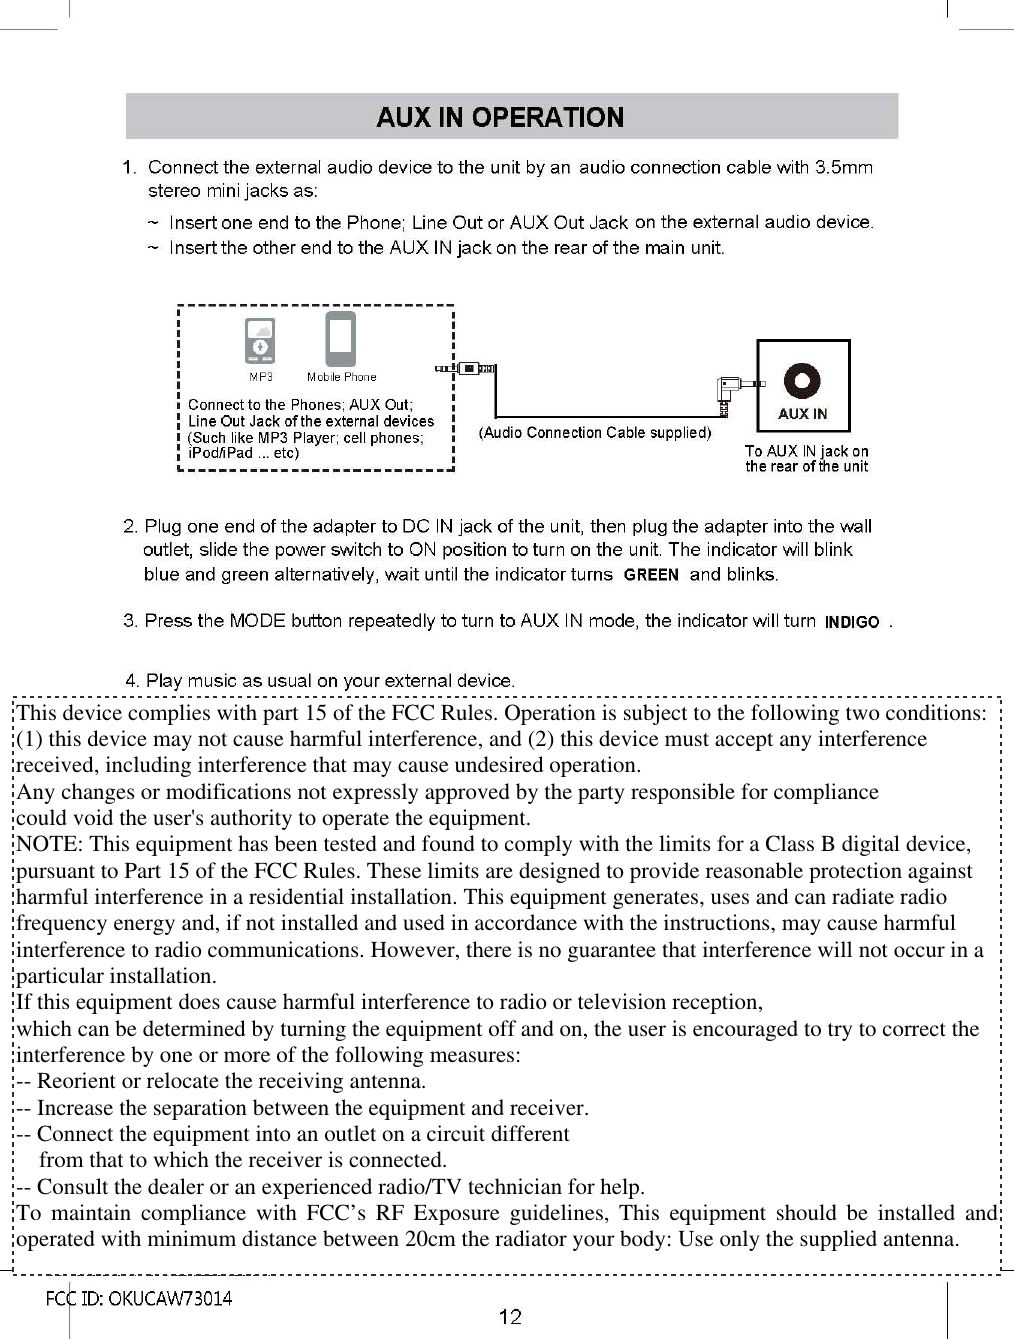 This device complies with part 15 of the FCC Rules. Operation is subject to the following twoconditions: (1) this device may not cause harmful interference, and (2) this device must accept anyinterference received, including interference that may cause undesired operation.Any changes or modifications not expressly approved by the party responsible for compliancecould void the user&apos;s authority to operate the equipment.NOTE: This equipment has been tested and found to comply with the limits for a Class B digital device,pursuant to Part 15 of the FCC Rules. These limits are designed to provide reasonable protection againstharmful interference in a residential installation. This equipment generates, uses and can radiate radiofrequency energy and, if not installed and used in accordance with the instructions, may cause harmfulinterference to radio communications. However, there is no guarantee that interference will not occur ina particular installation.If this equipment does cause harmful interference to radio or television reception,which can be determined by turning the equipment off and on, the user is encouraged to try to correct theinterference by one or more of the following measures:-- Reorient or relocate the receiving antenna.-- Increase the separation between the equipment and receiver.-- Connect the equipment into an outlet on a circuit differentfrom that to which the receiver is connected.-- Consult the dealer or an experienced radio/TV technician for help.To maintain compliance with FCC’s RF Exposure guidelines, This equipment should be installed andoperated with minimum distance between 20cm the radiator your body: Use only the supplied antenna.This device complies with part 15 of the FCC Rules. Operation is subject to the following two conditions:(1) this device may not cause harmful interference, and (2) this device must accept any interferencereceived, including interference that may cause undesired operation.Any changes or modifications not expressly approved by the party responsible for compliancecould void the user&apos;s authority to operate the equipment.NOTE: This equipment has been tested and found to comply with the limits for a Class B digital device,pursuant to Part 15 of the FCC Rules. These limits are designed to provide reasonable protection againstharmful interference in a residential installation. This equipment generates, uses and can radiate radiofrequency energy and, if not installed and used in accordance with the instructions, may cause harmfulinterference to radio communications. However, there is no guarantee that interference will not occur in aparticular installation.If this equipment does cause harmful interference to radio or television reception,which can be determined by turning the equipment off and on, the user is encouraged to try to correct theinterference by one or more of the following measures:-- Reorient or relocate the receiving antenna.-- Increase the separation between the equipment and receiver.-- Connect the equipment into an outlet on a circuit differentfrom that to which the receiver is connected.-- Consult the dealer or an experienced radio/TV technician for help.To  maintain compliance  with  FCC’s  RF  Exposure  guidelines,  This  equipment  should  be  installed  andoperated with minimum distance between 20cm the radiator your body: Use only the supplied antenna.